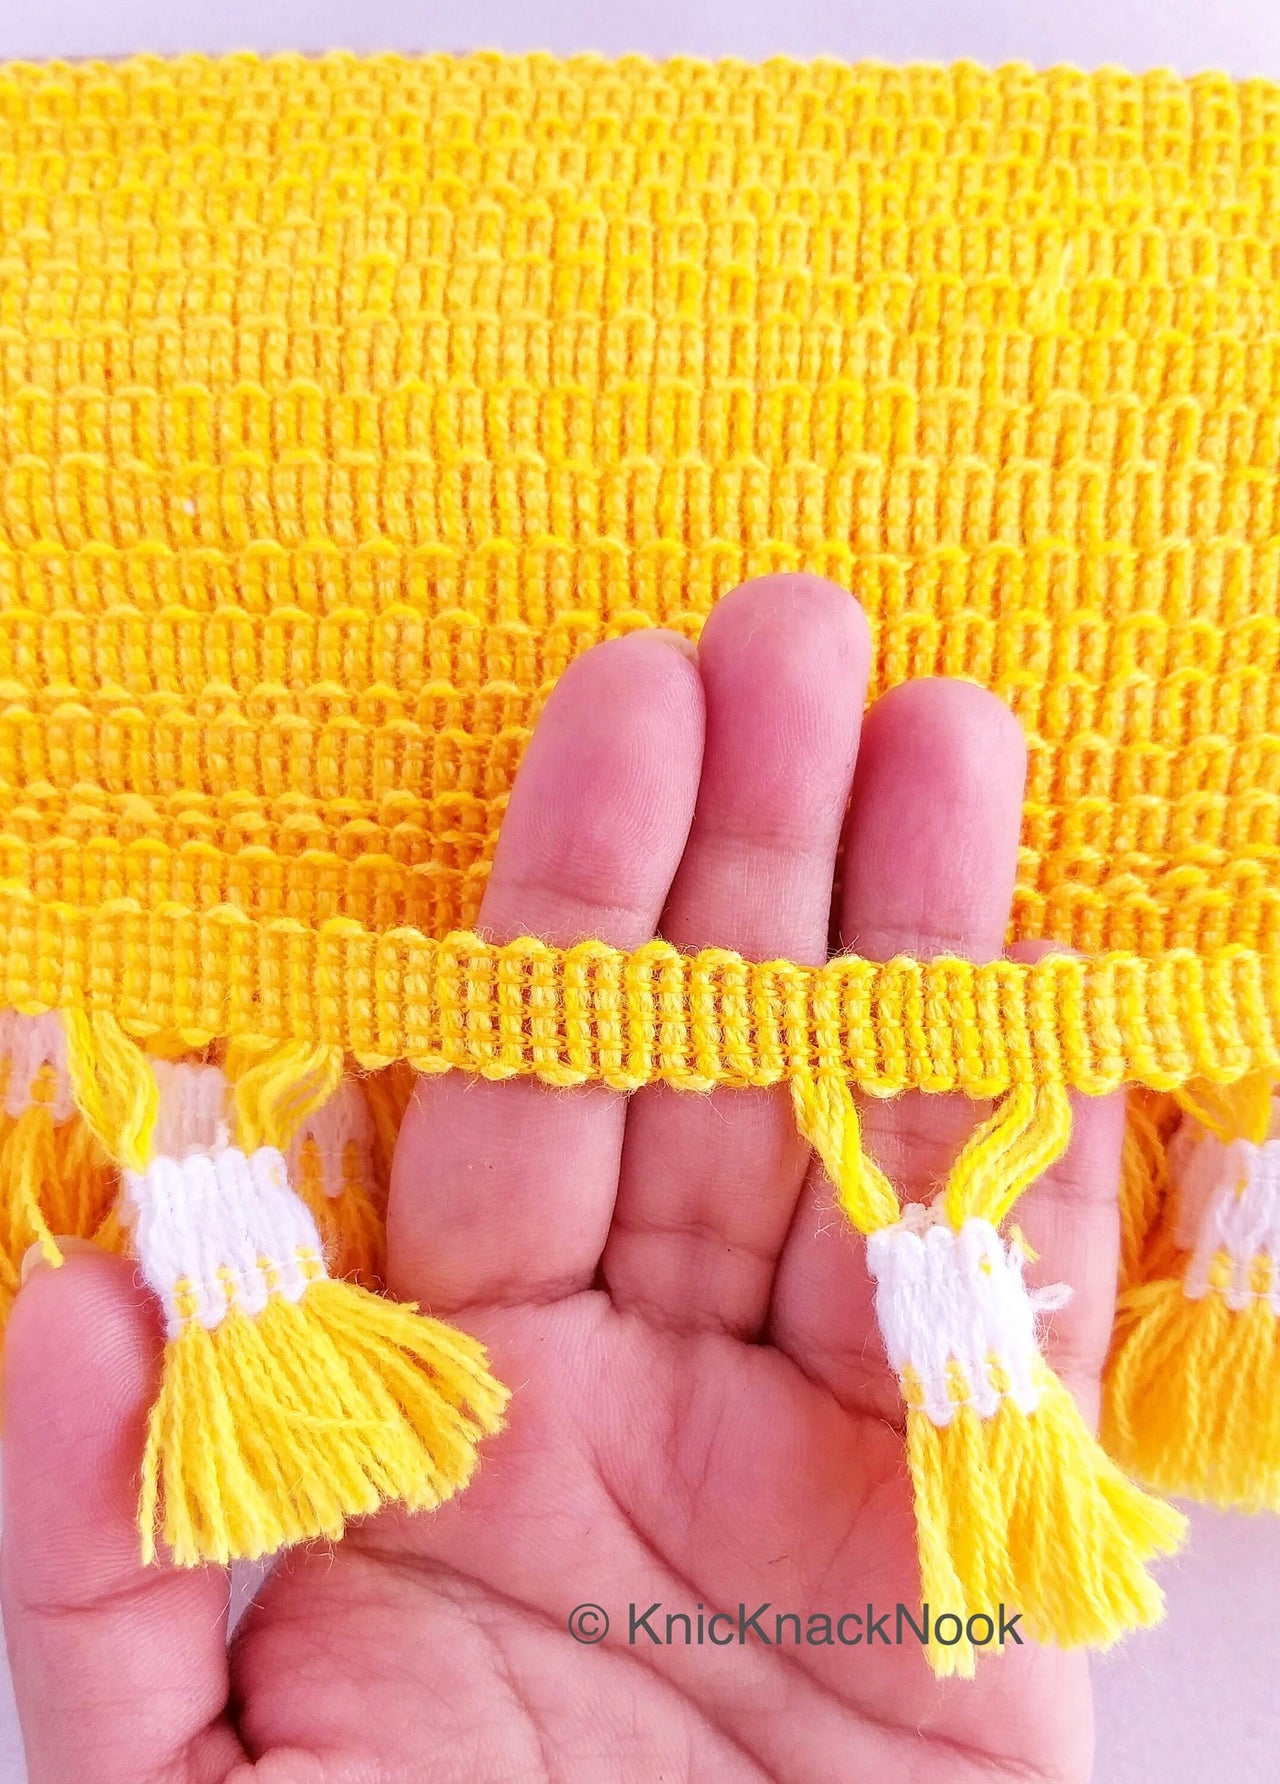 Yellow and White Tassel With Yellow Thread Lace Trim, Fringe Trim, Tassels